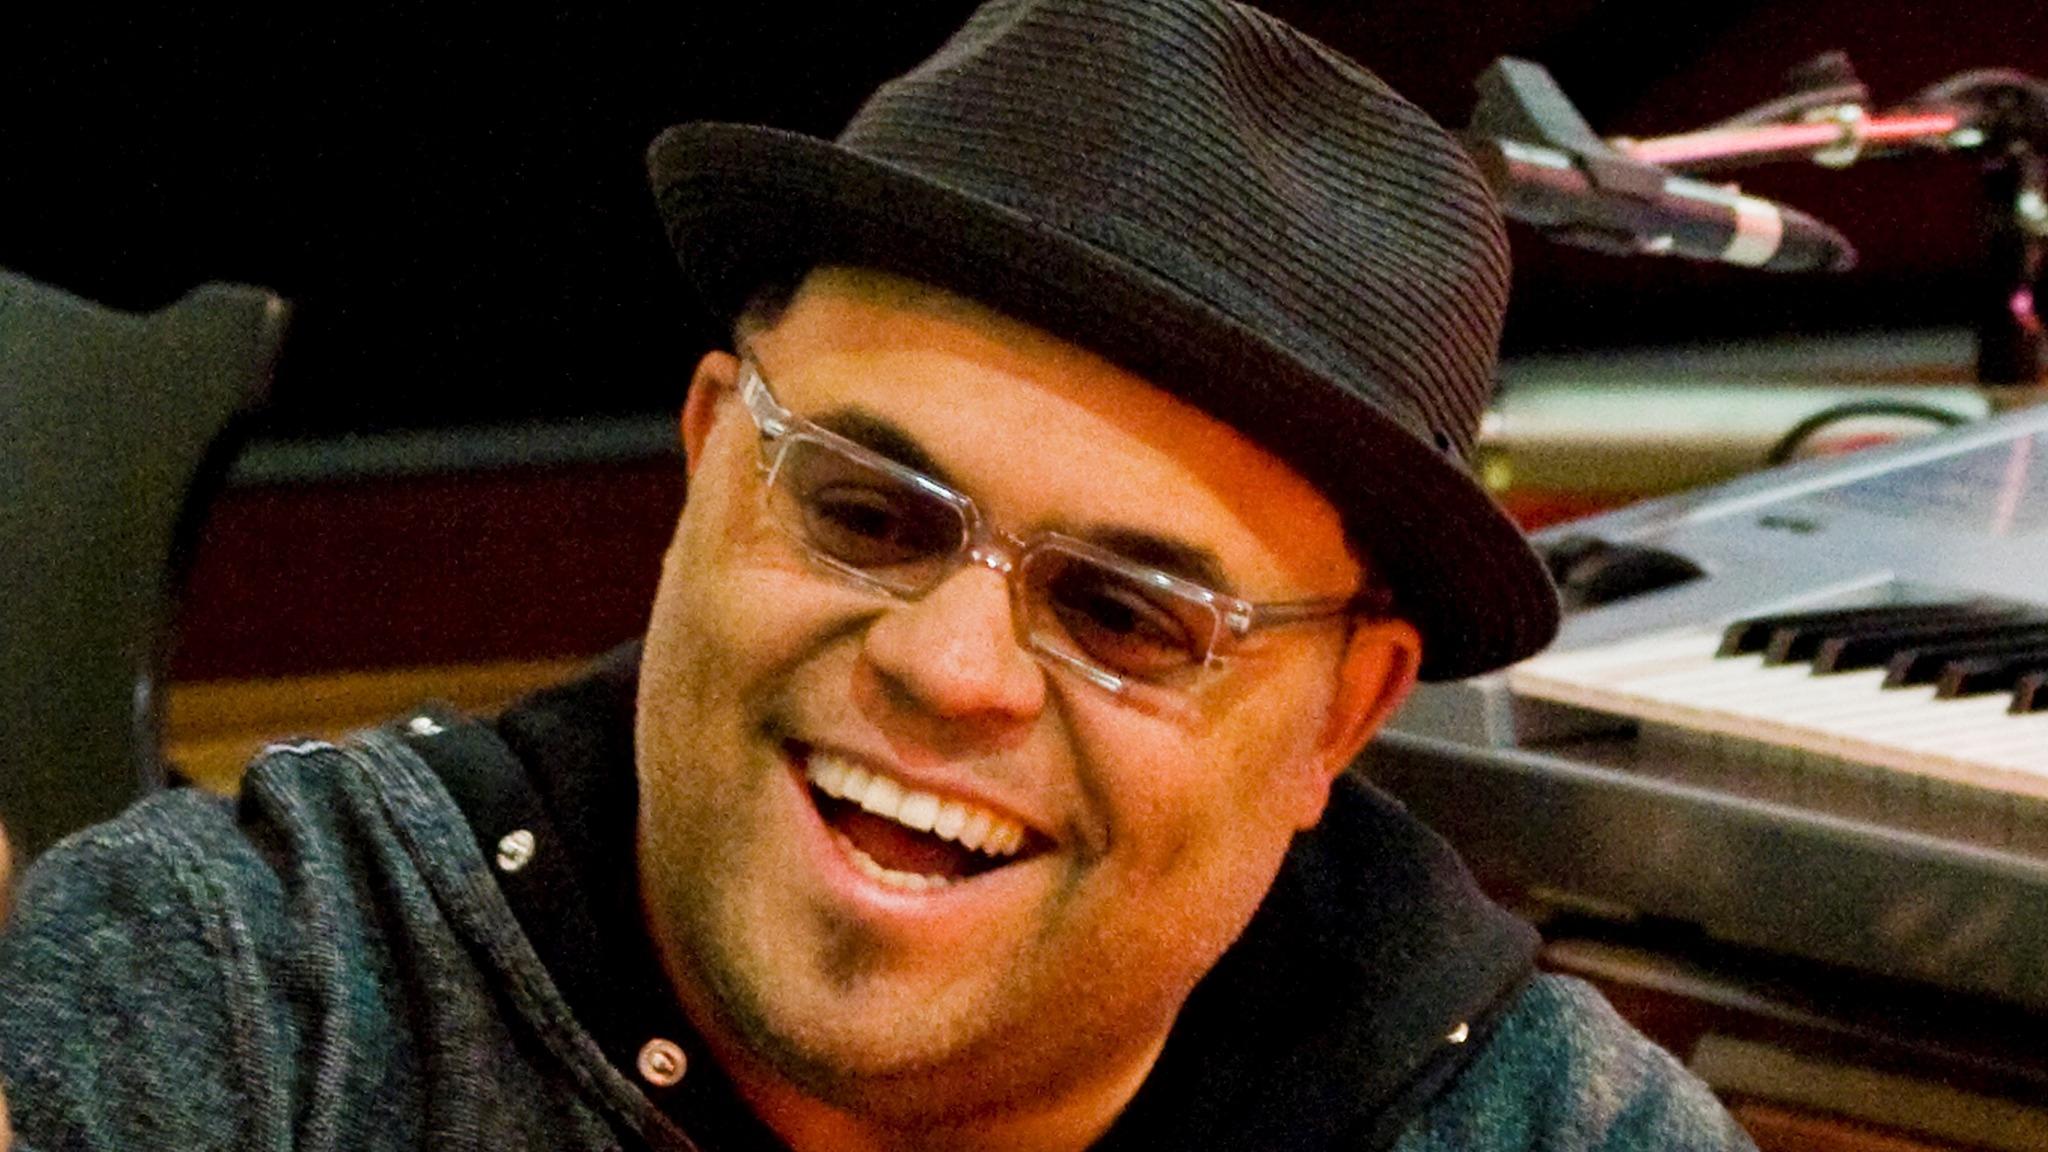 Israel Houghton Tickets, 2022 Concert Tour Dates Ticketmaster.